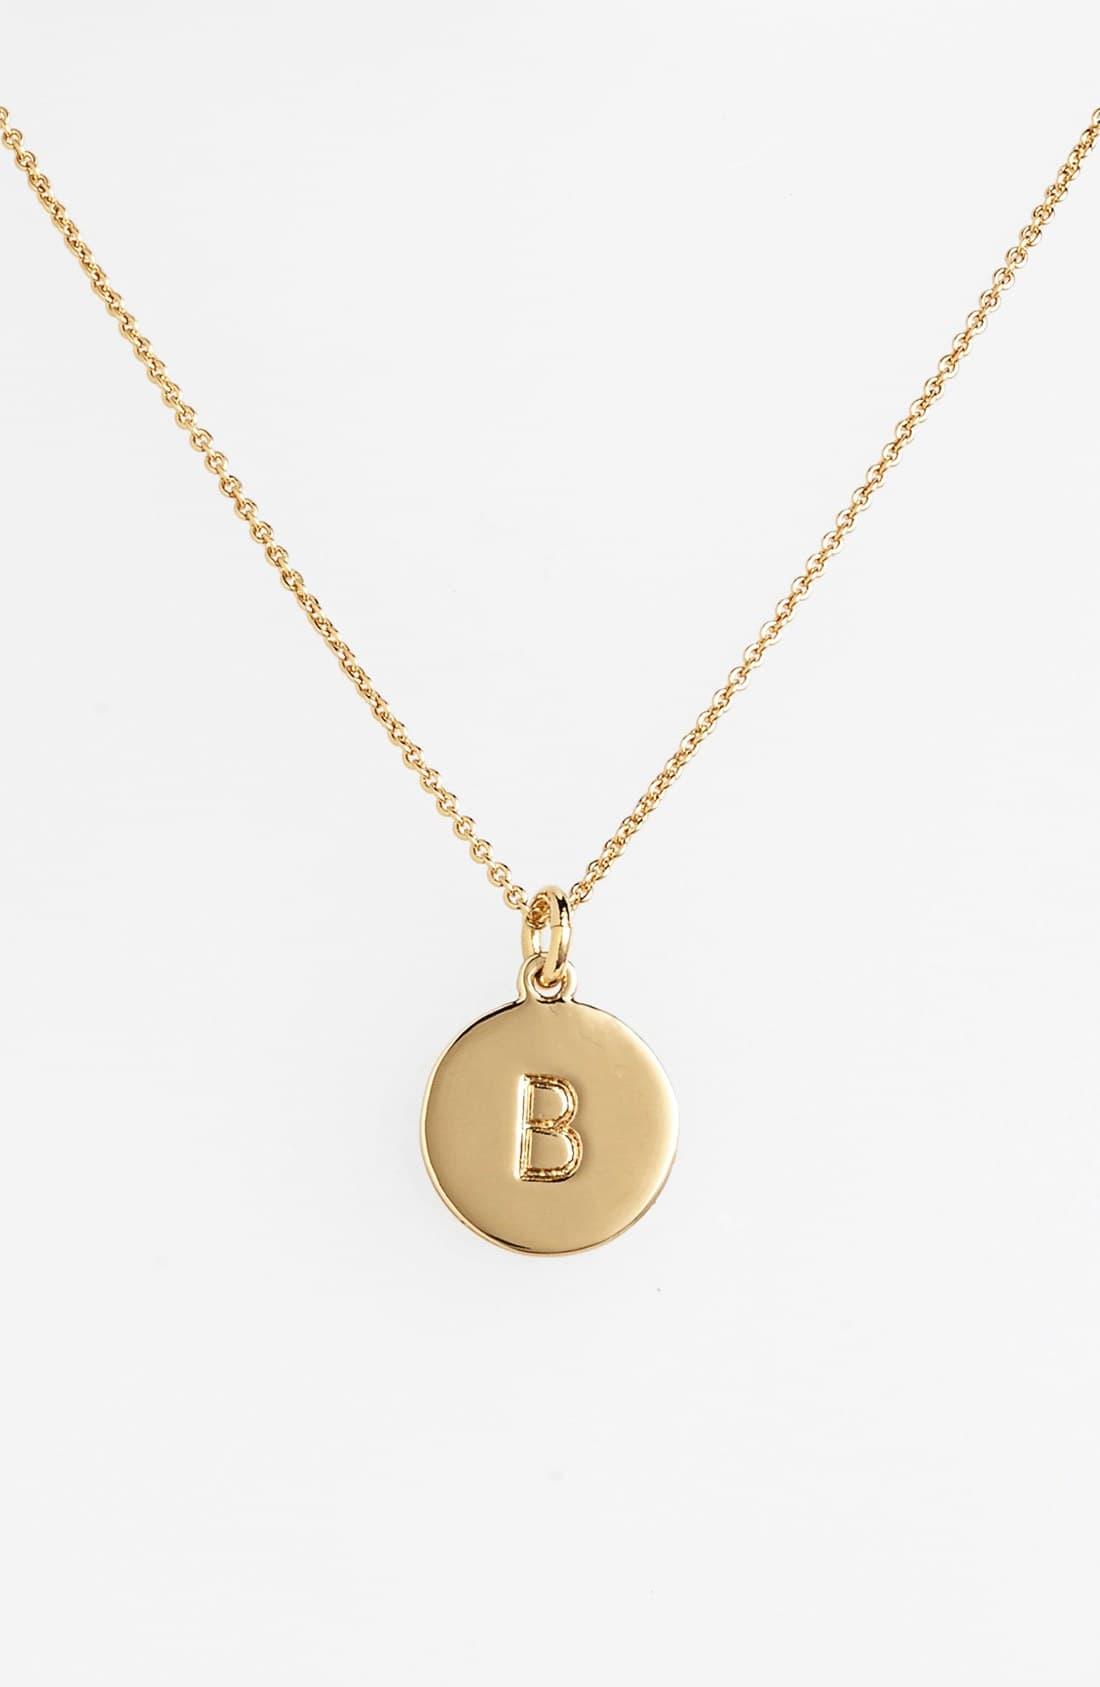 Kate Spade One In A Million Initial Pendant Necklace in ...